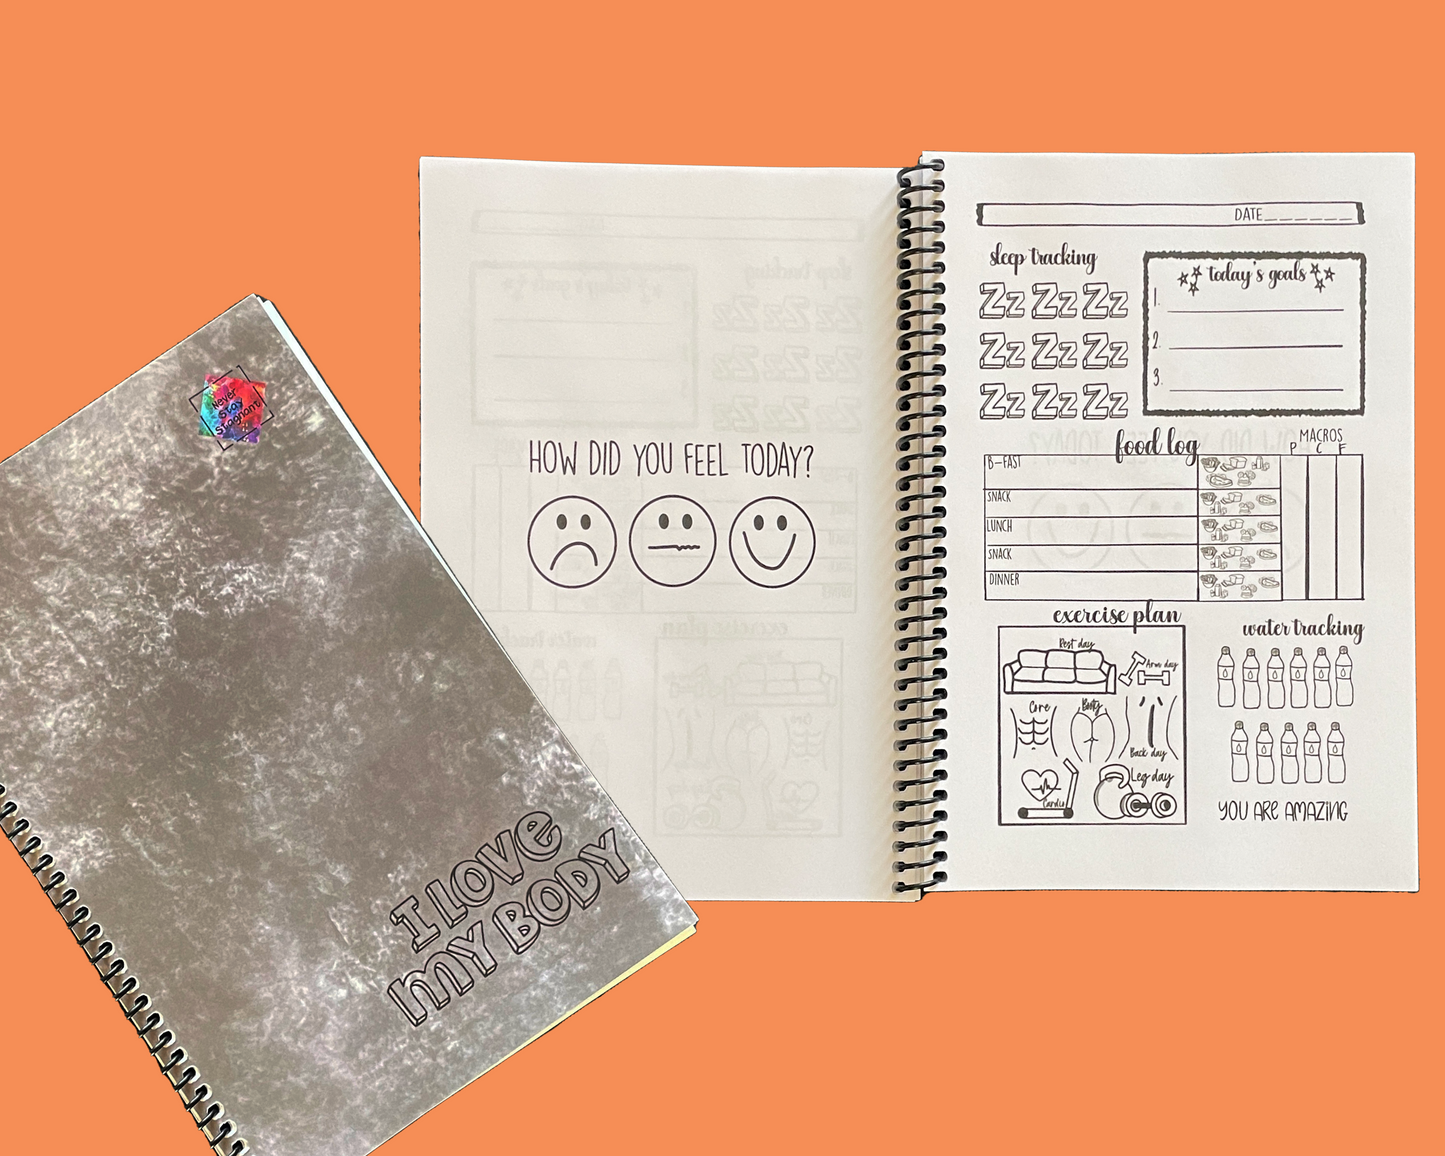 I Love My Body: An Interactive Fitness Journal